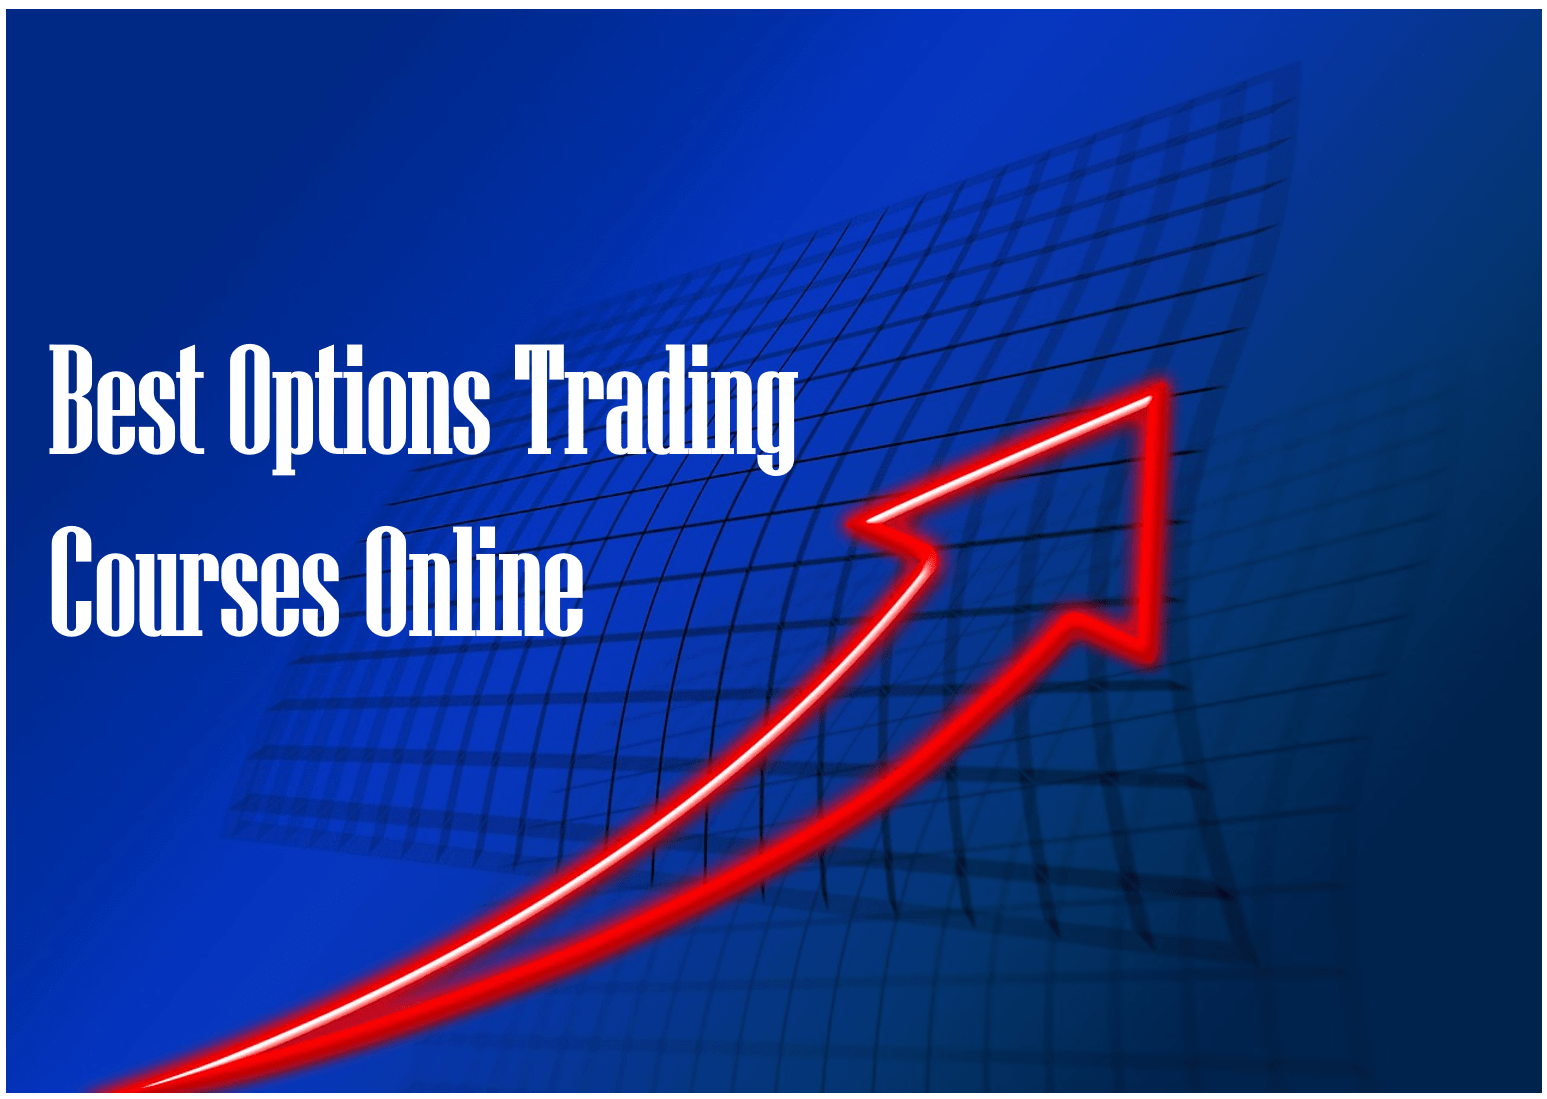 Options Trading Courses Online: A Well Researched Recommendation